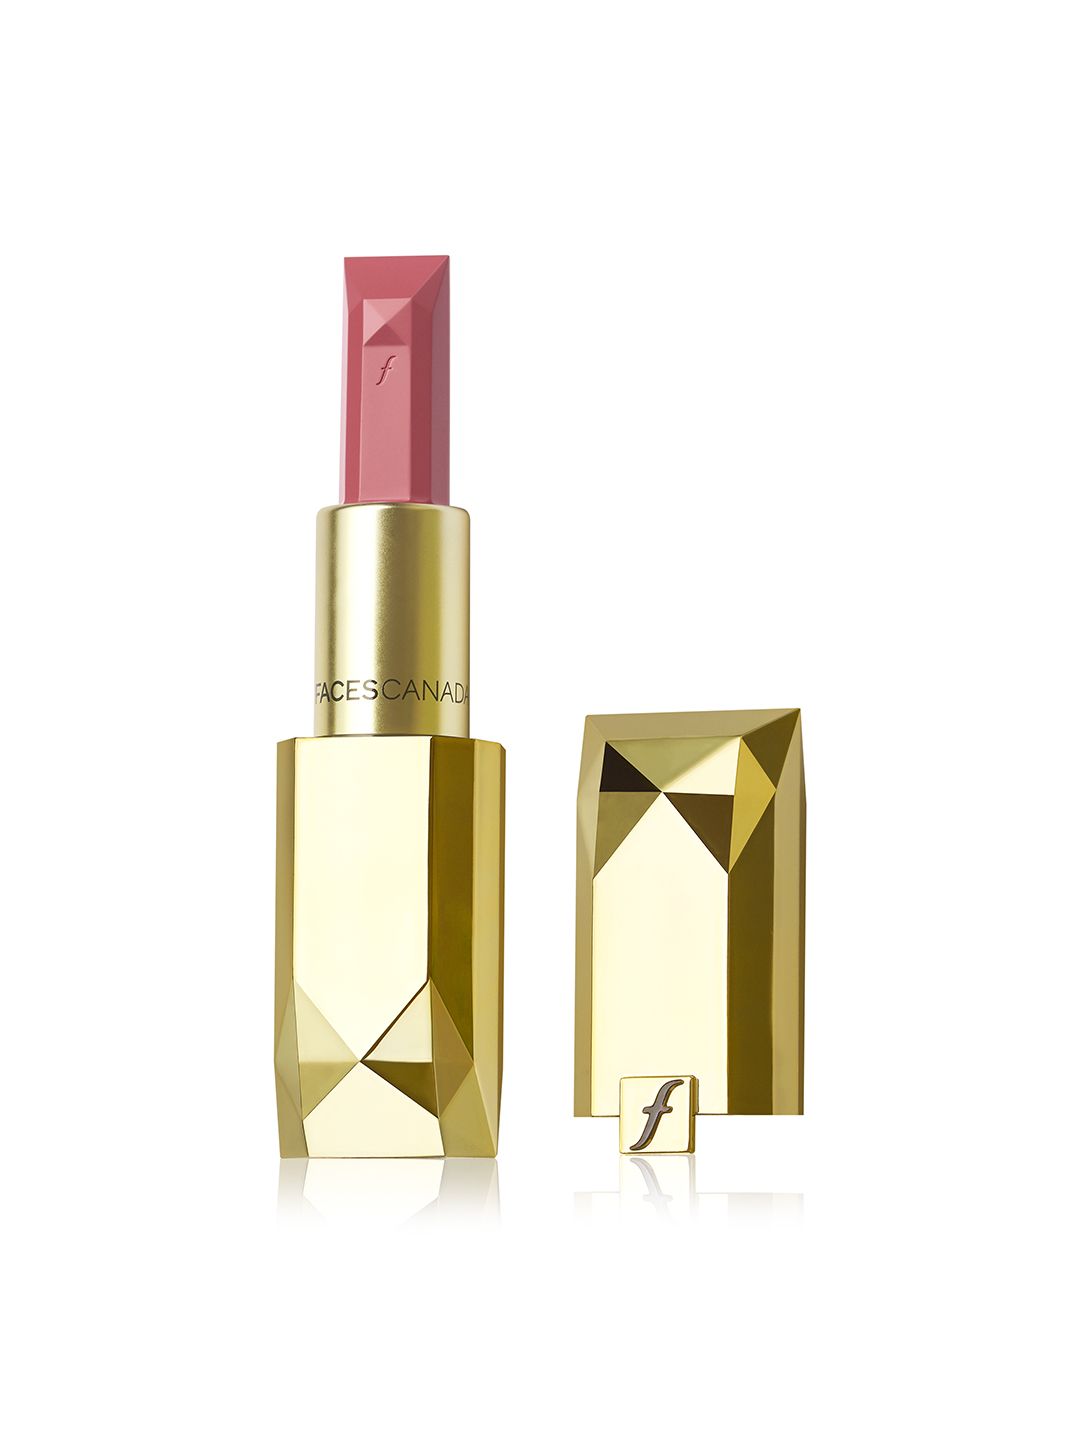 Faces Canada Belle De Luxe Luxury Lipstick with Rose Extracts Juliet Rose 3.8g Price in India